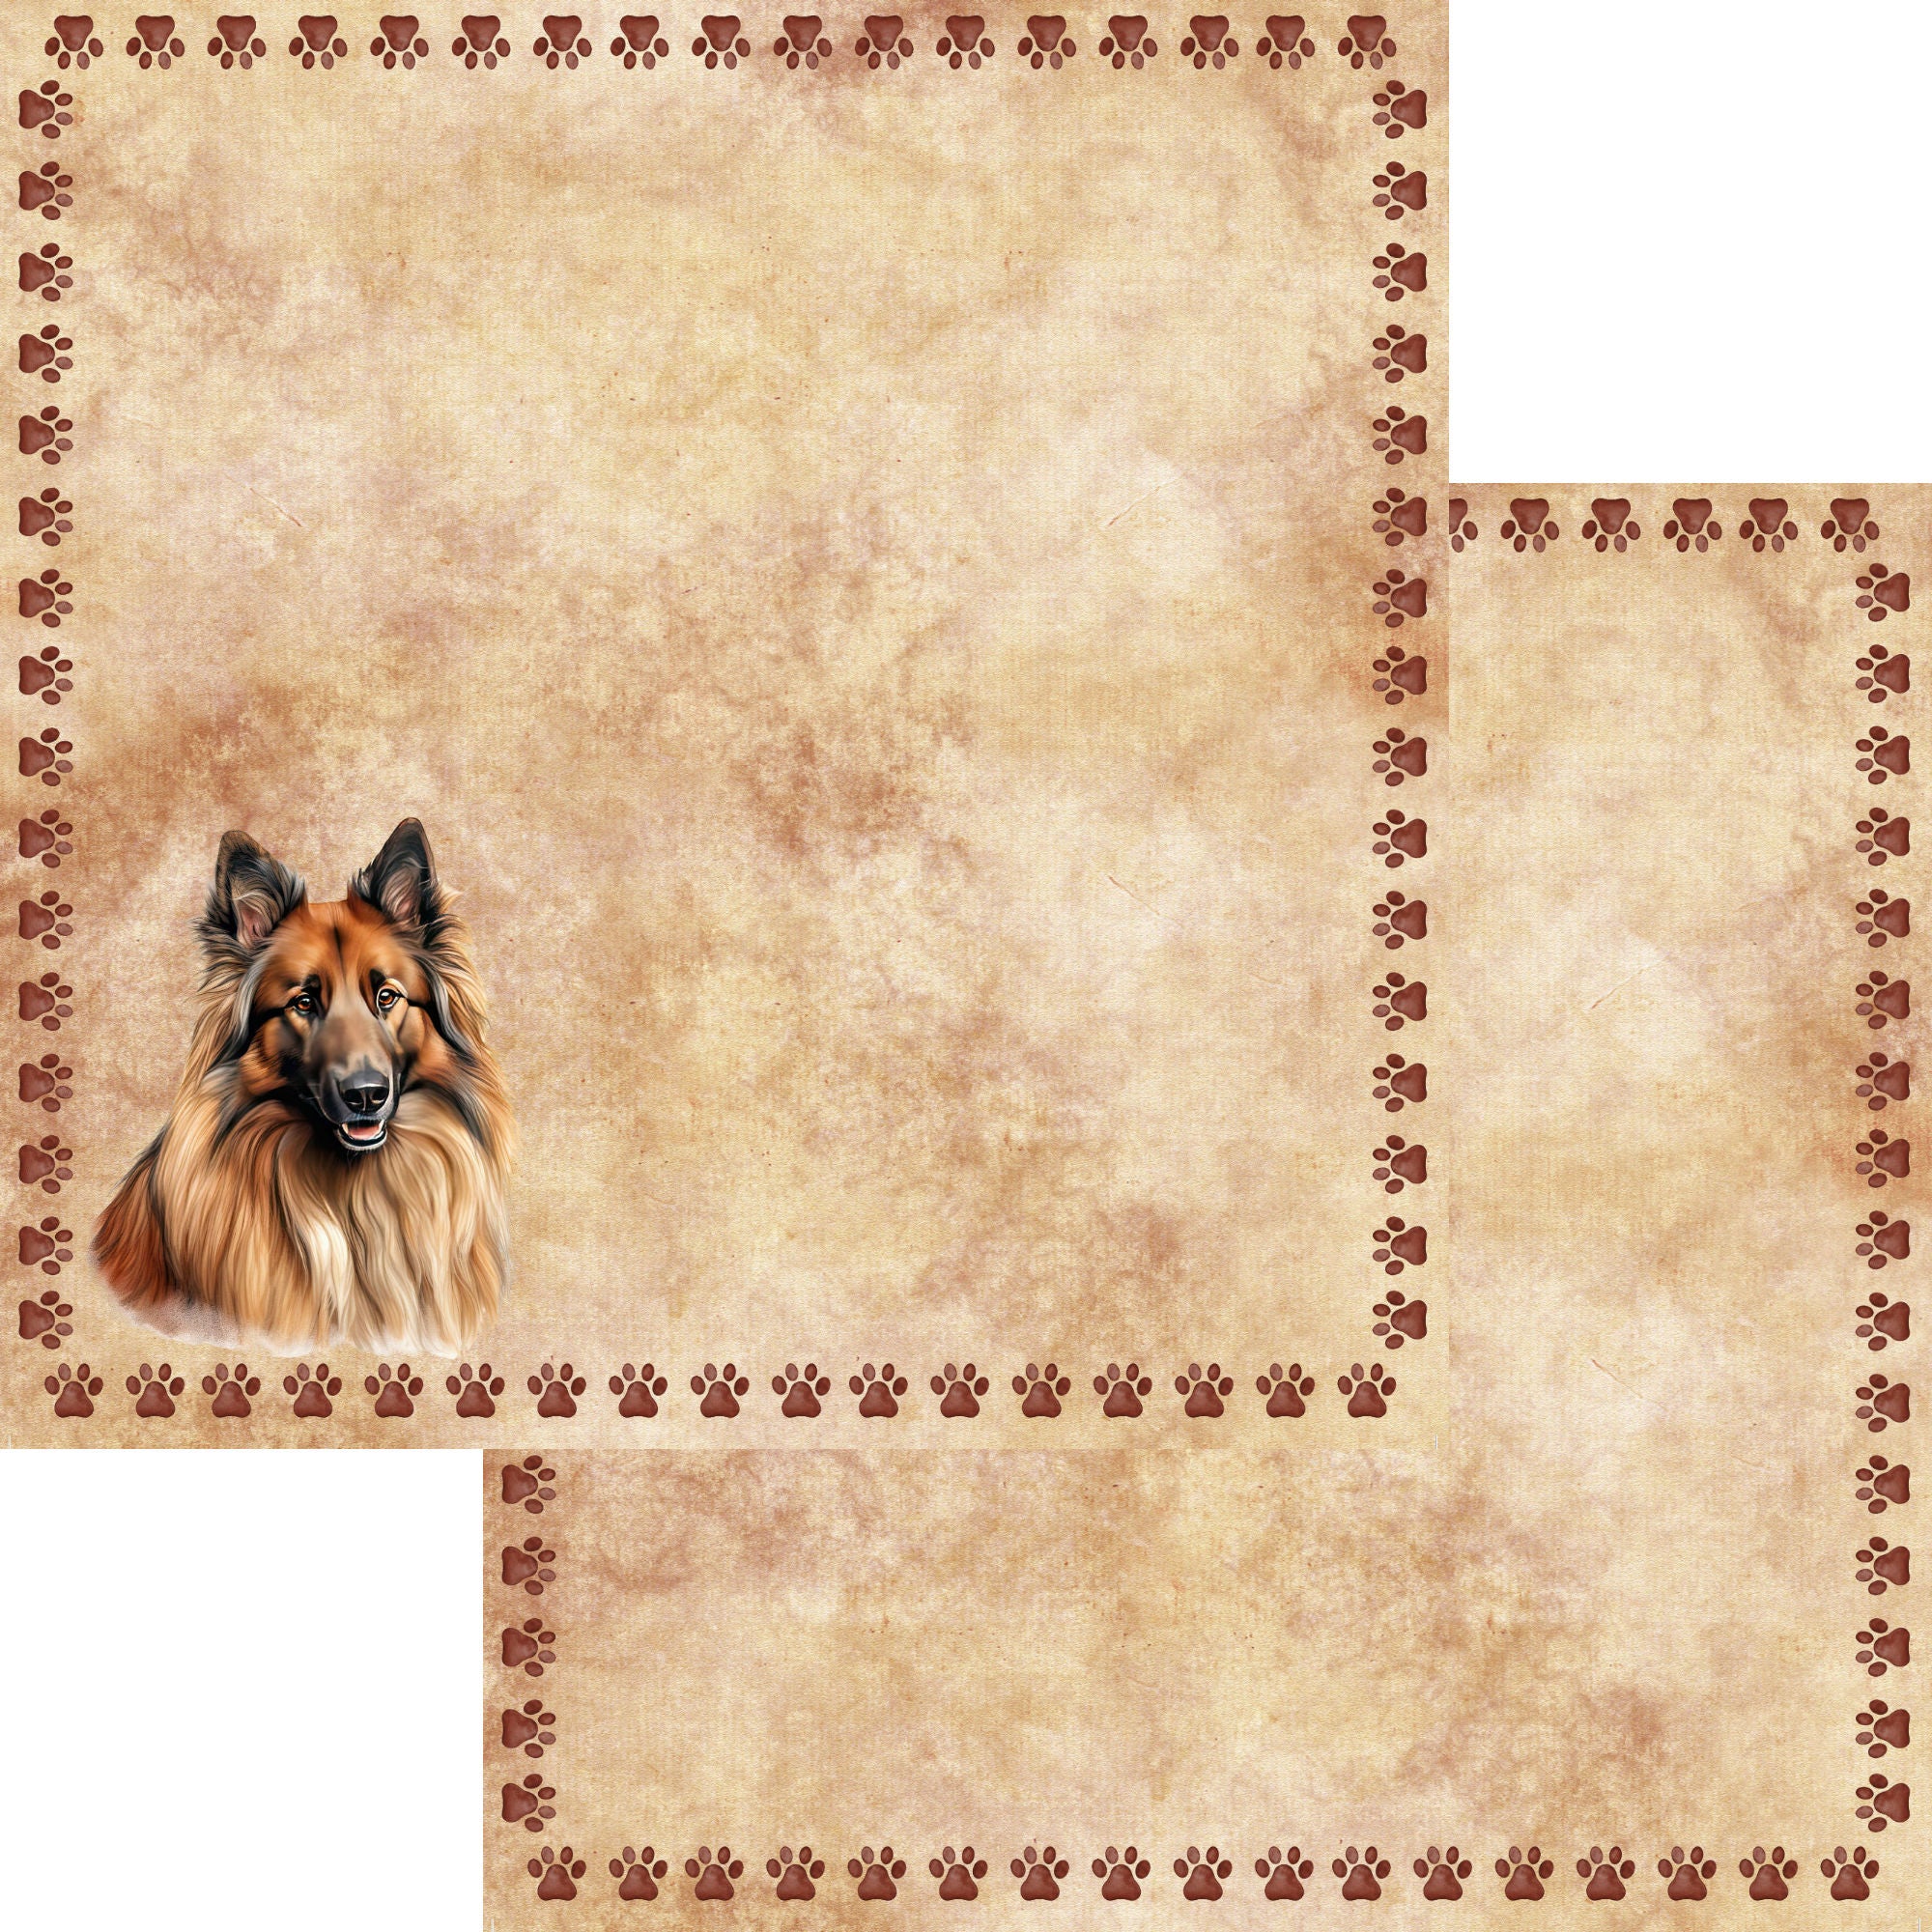 Dog Breeds Collection Belgian Shepherd 12 x 12 Double-Sided Scrapbook Paper by SSC Designs